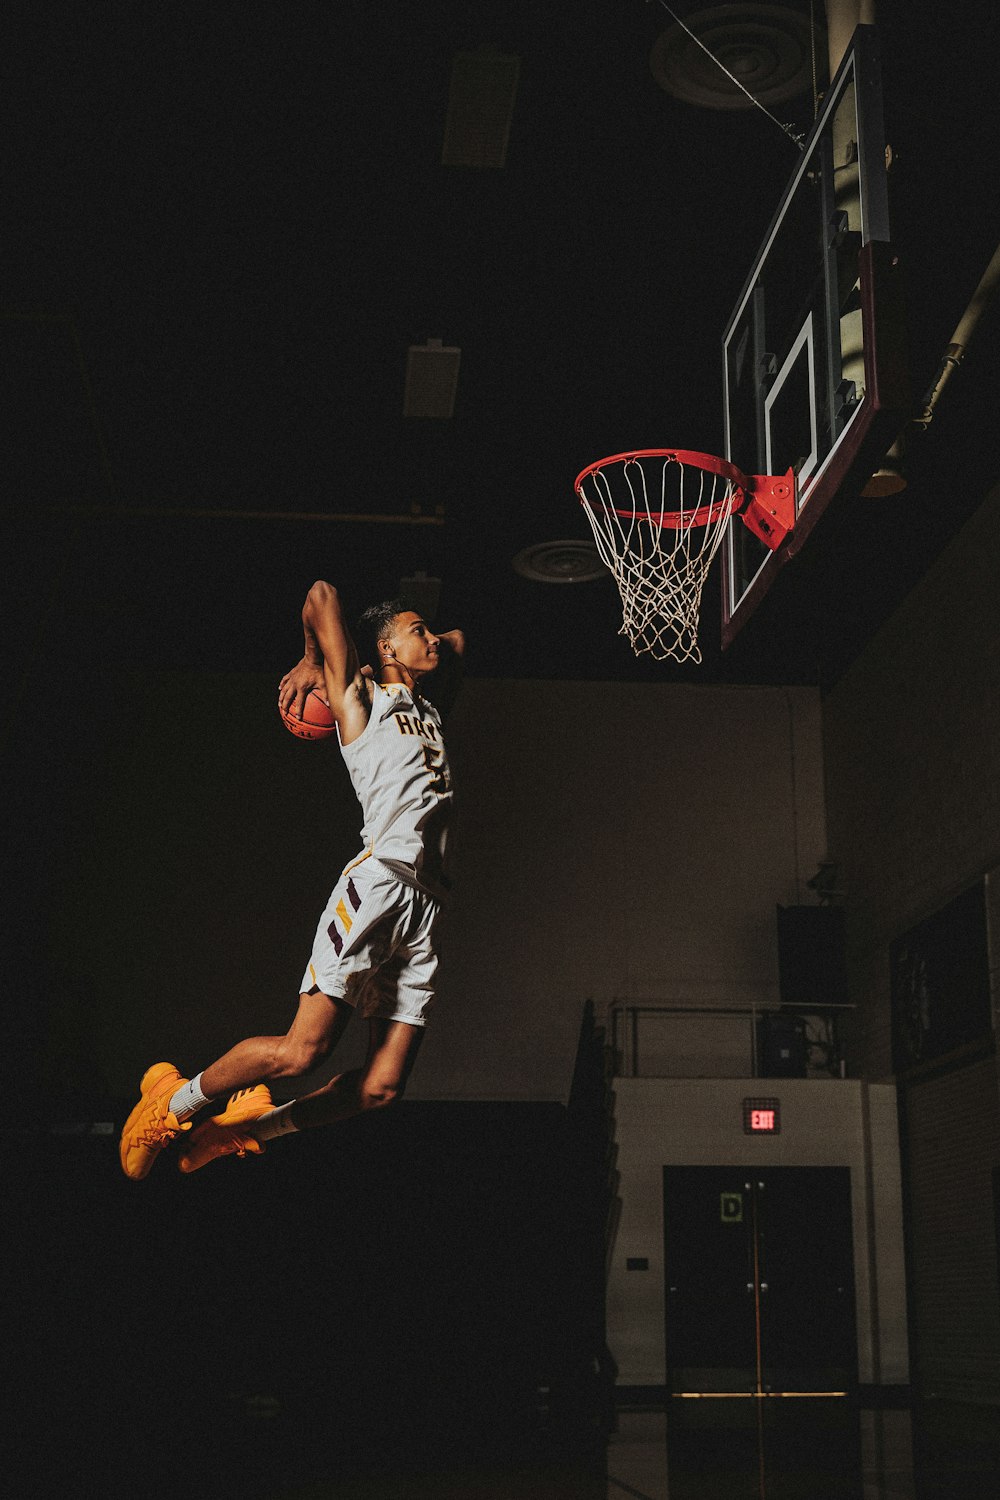 Basketball Dunk Pictures | Download Free Images on Unsplash